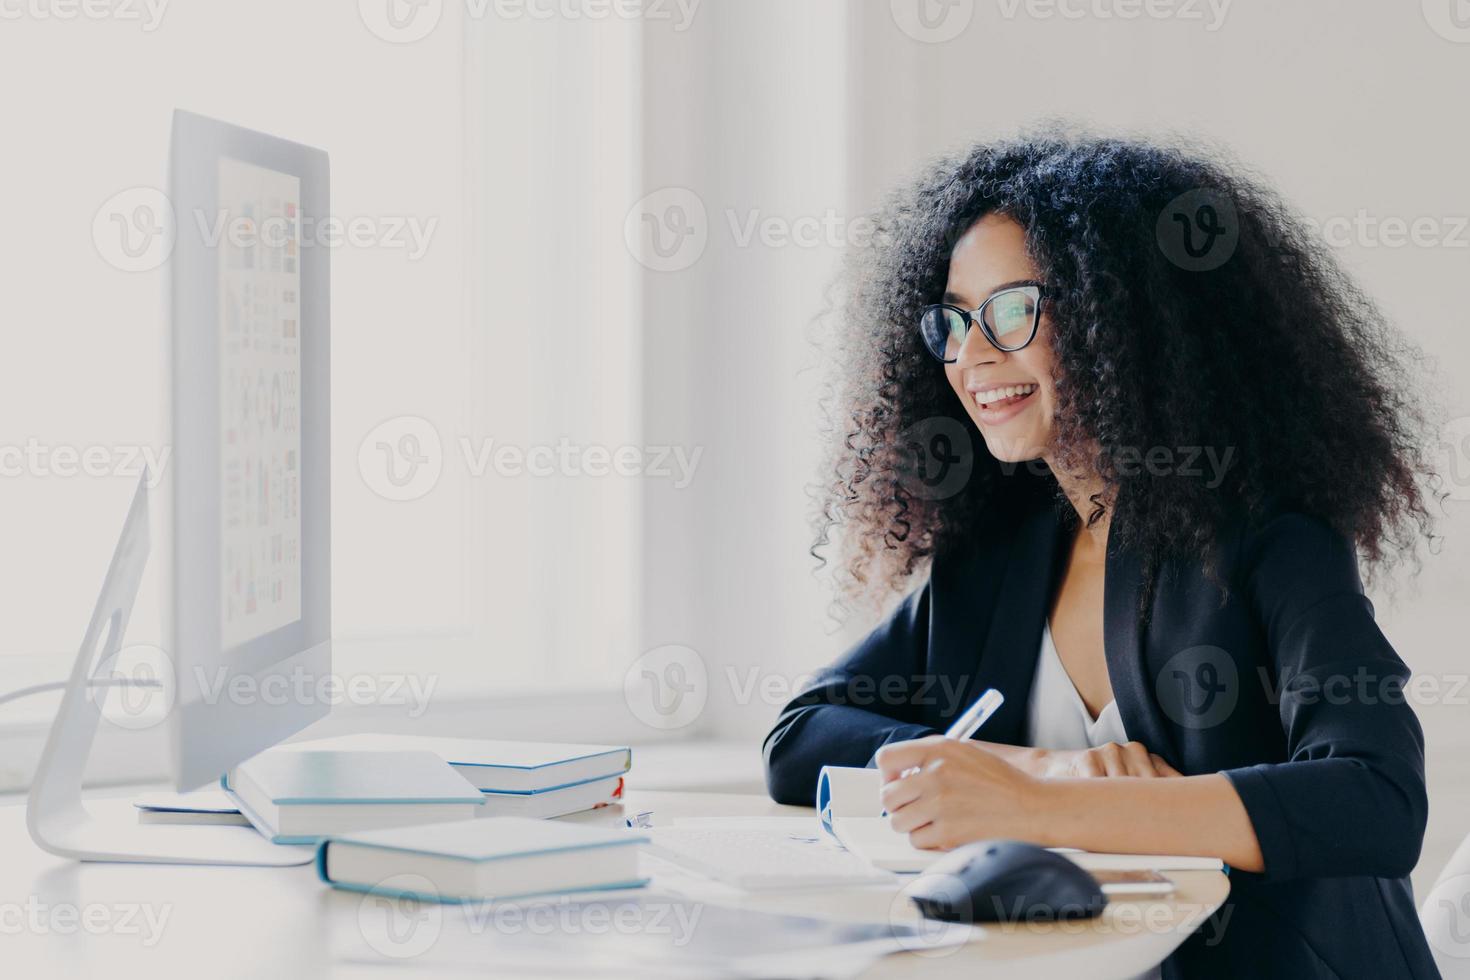 Professional curly haired woman manager makes report, focused into screen, writes down information, wears glasses and formal suit, notes idea for strartup planning, poses in office interior. photo